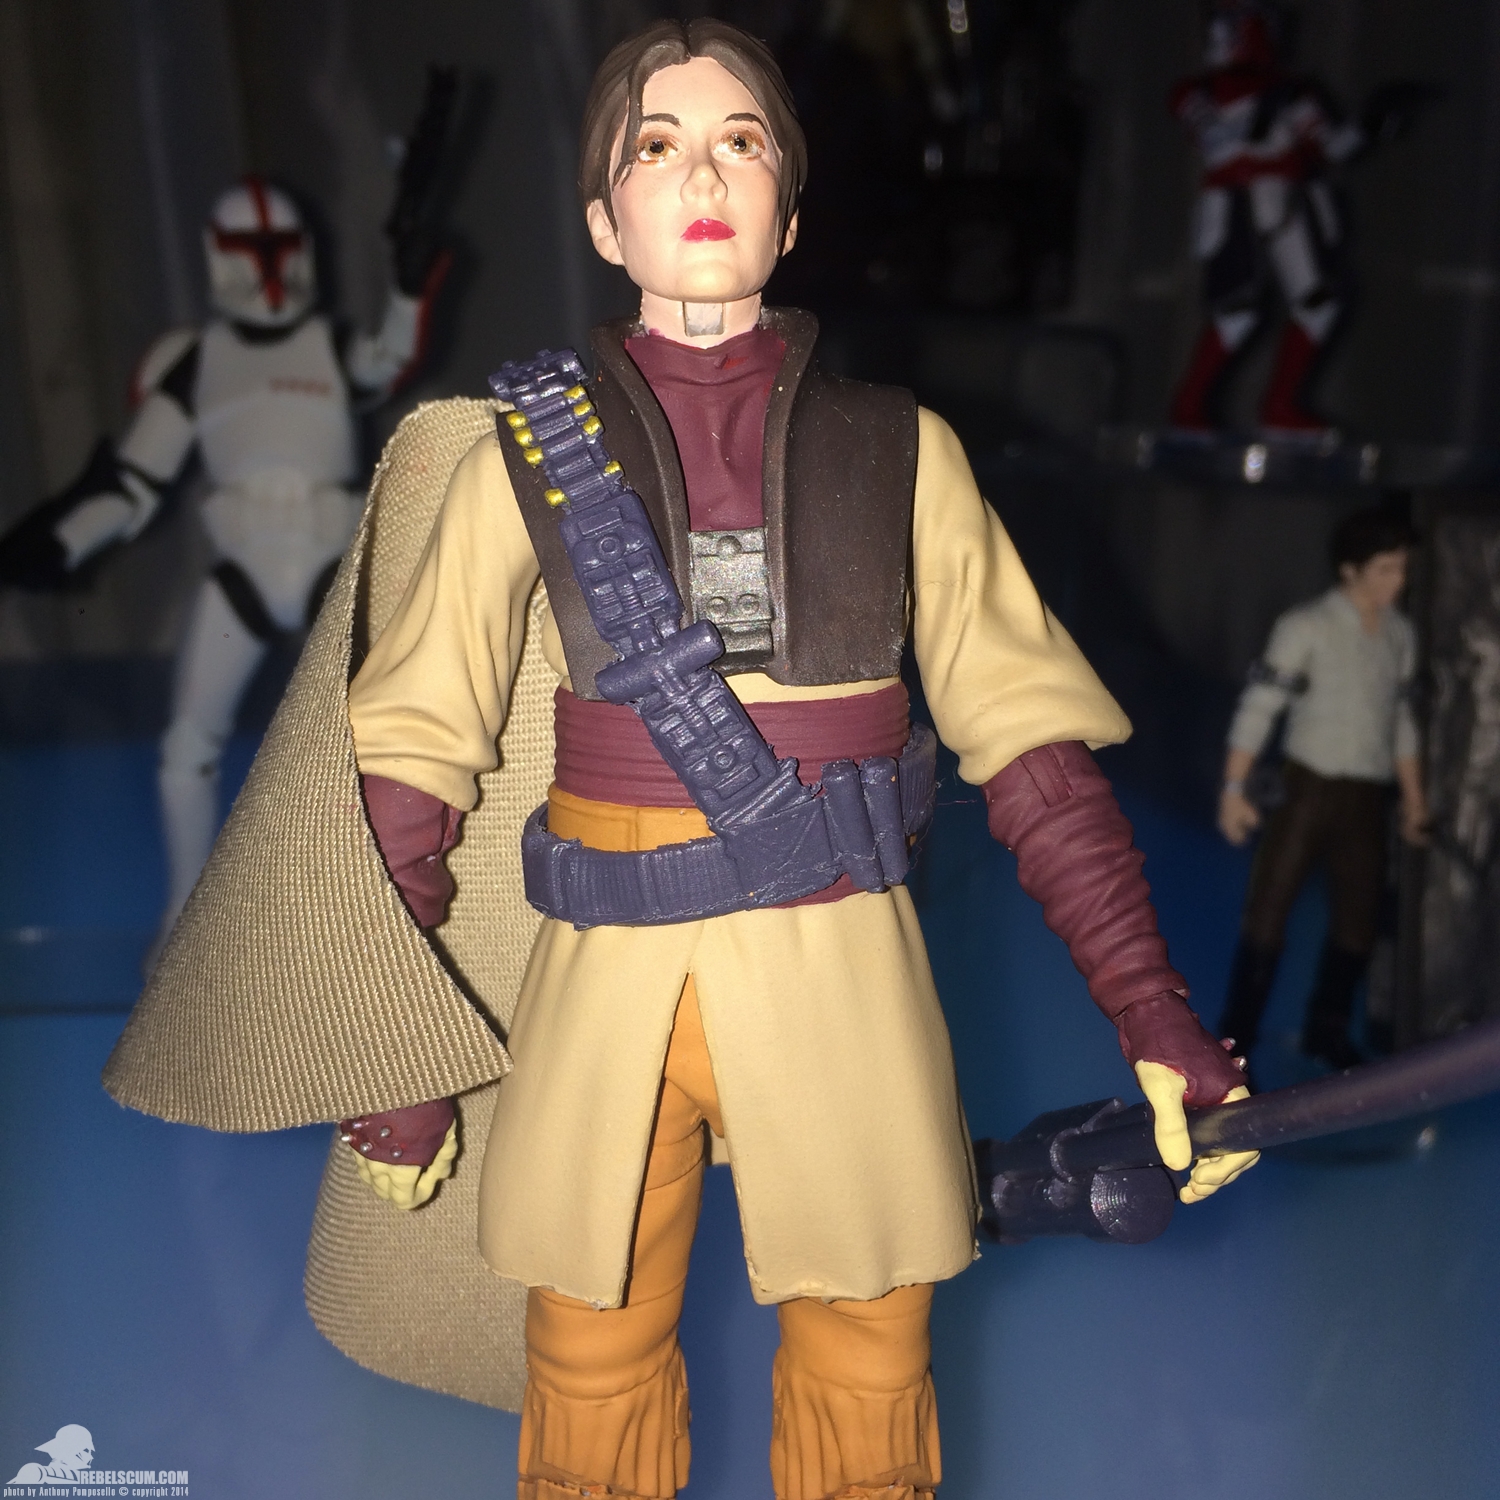 Twas-The-Night-Before-NYCC-Hasbro-Party-First-Look-013.jpg